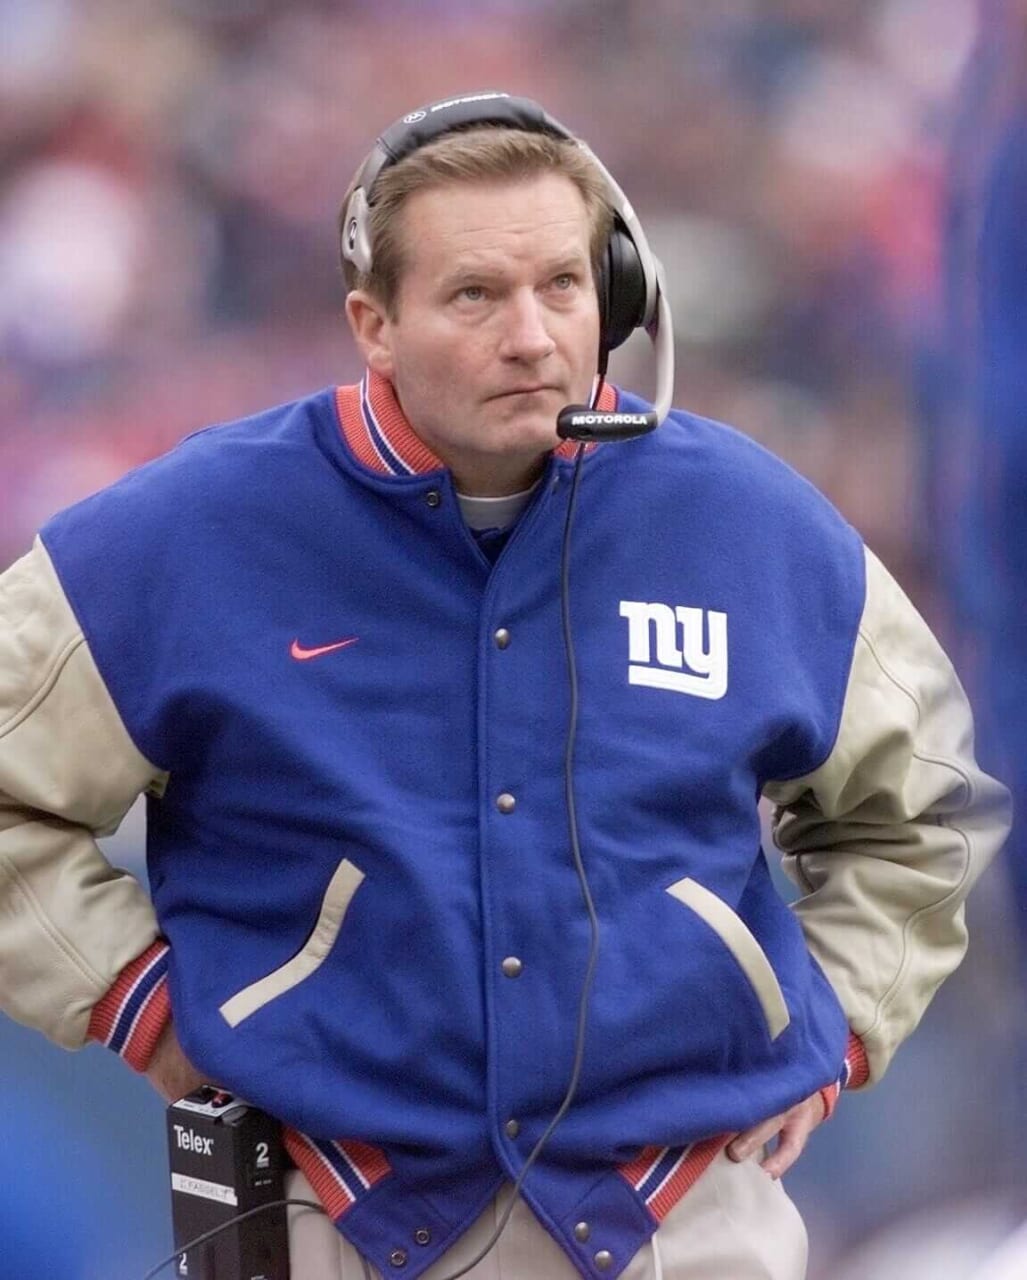 Former New York Giants head coach Jim Fassel passes away at 71